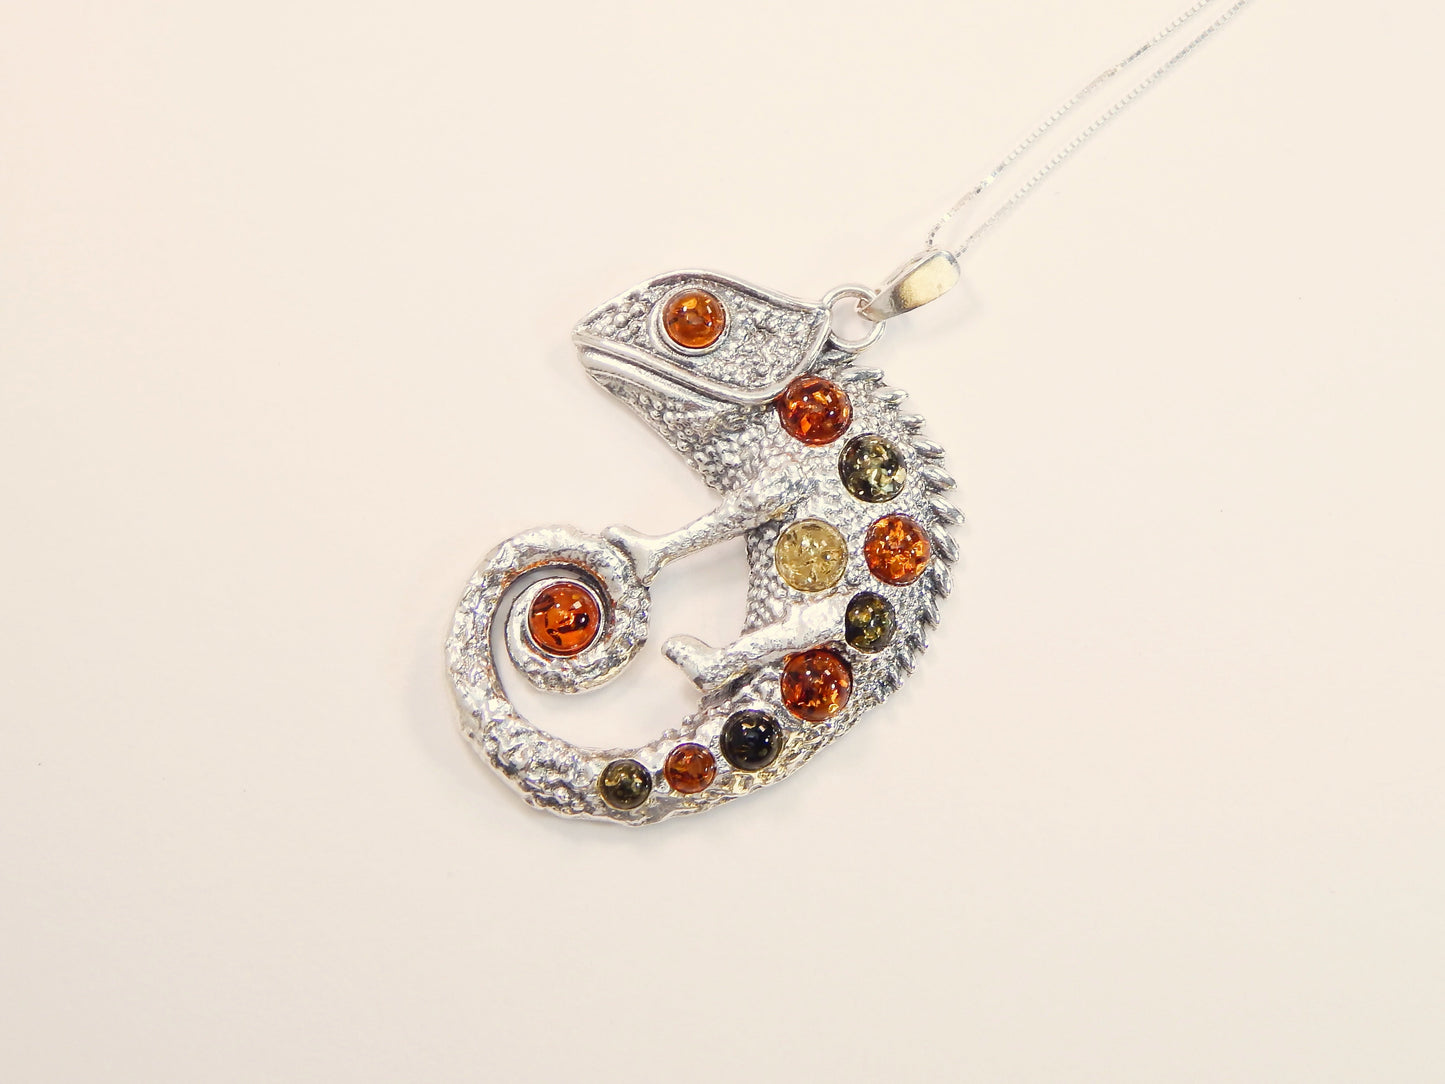 Natural Baltic Multicolor Amber Chameleon Pendant Necklace in 925 Sterling Silver